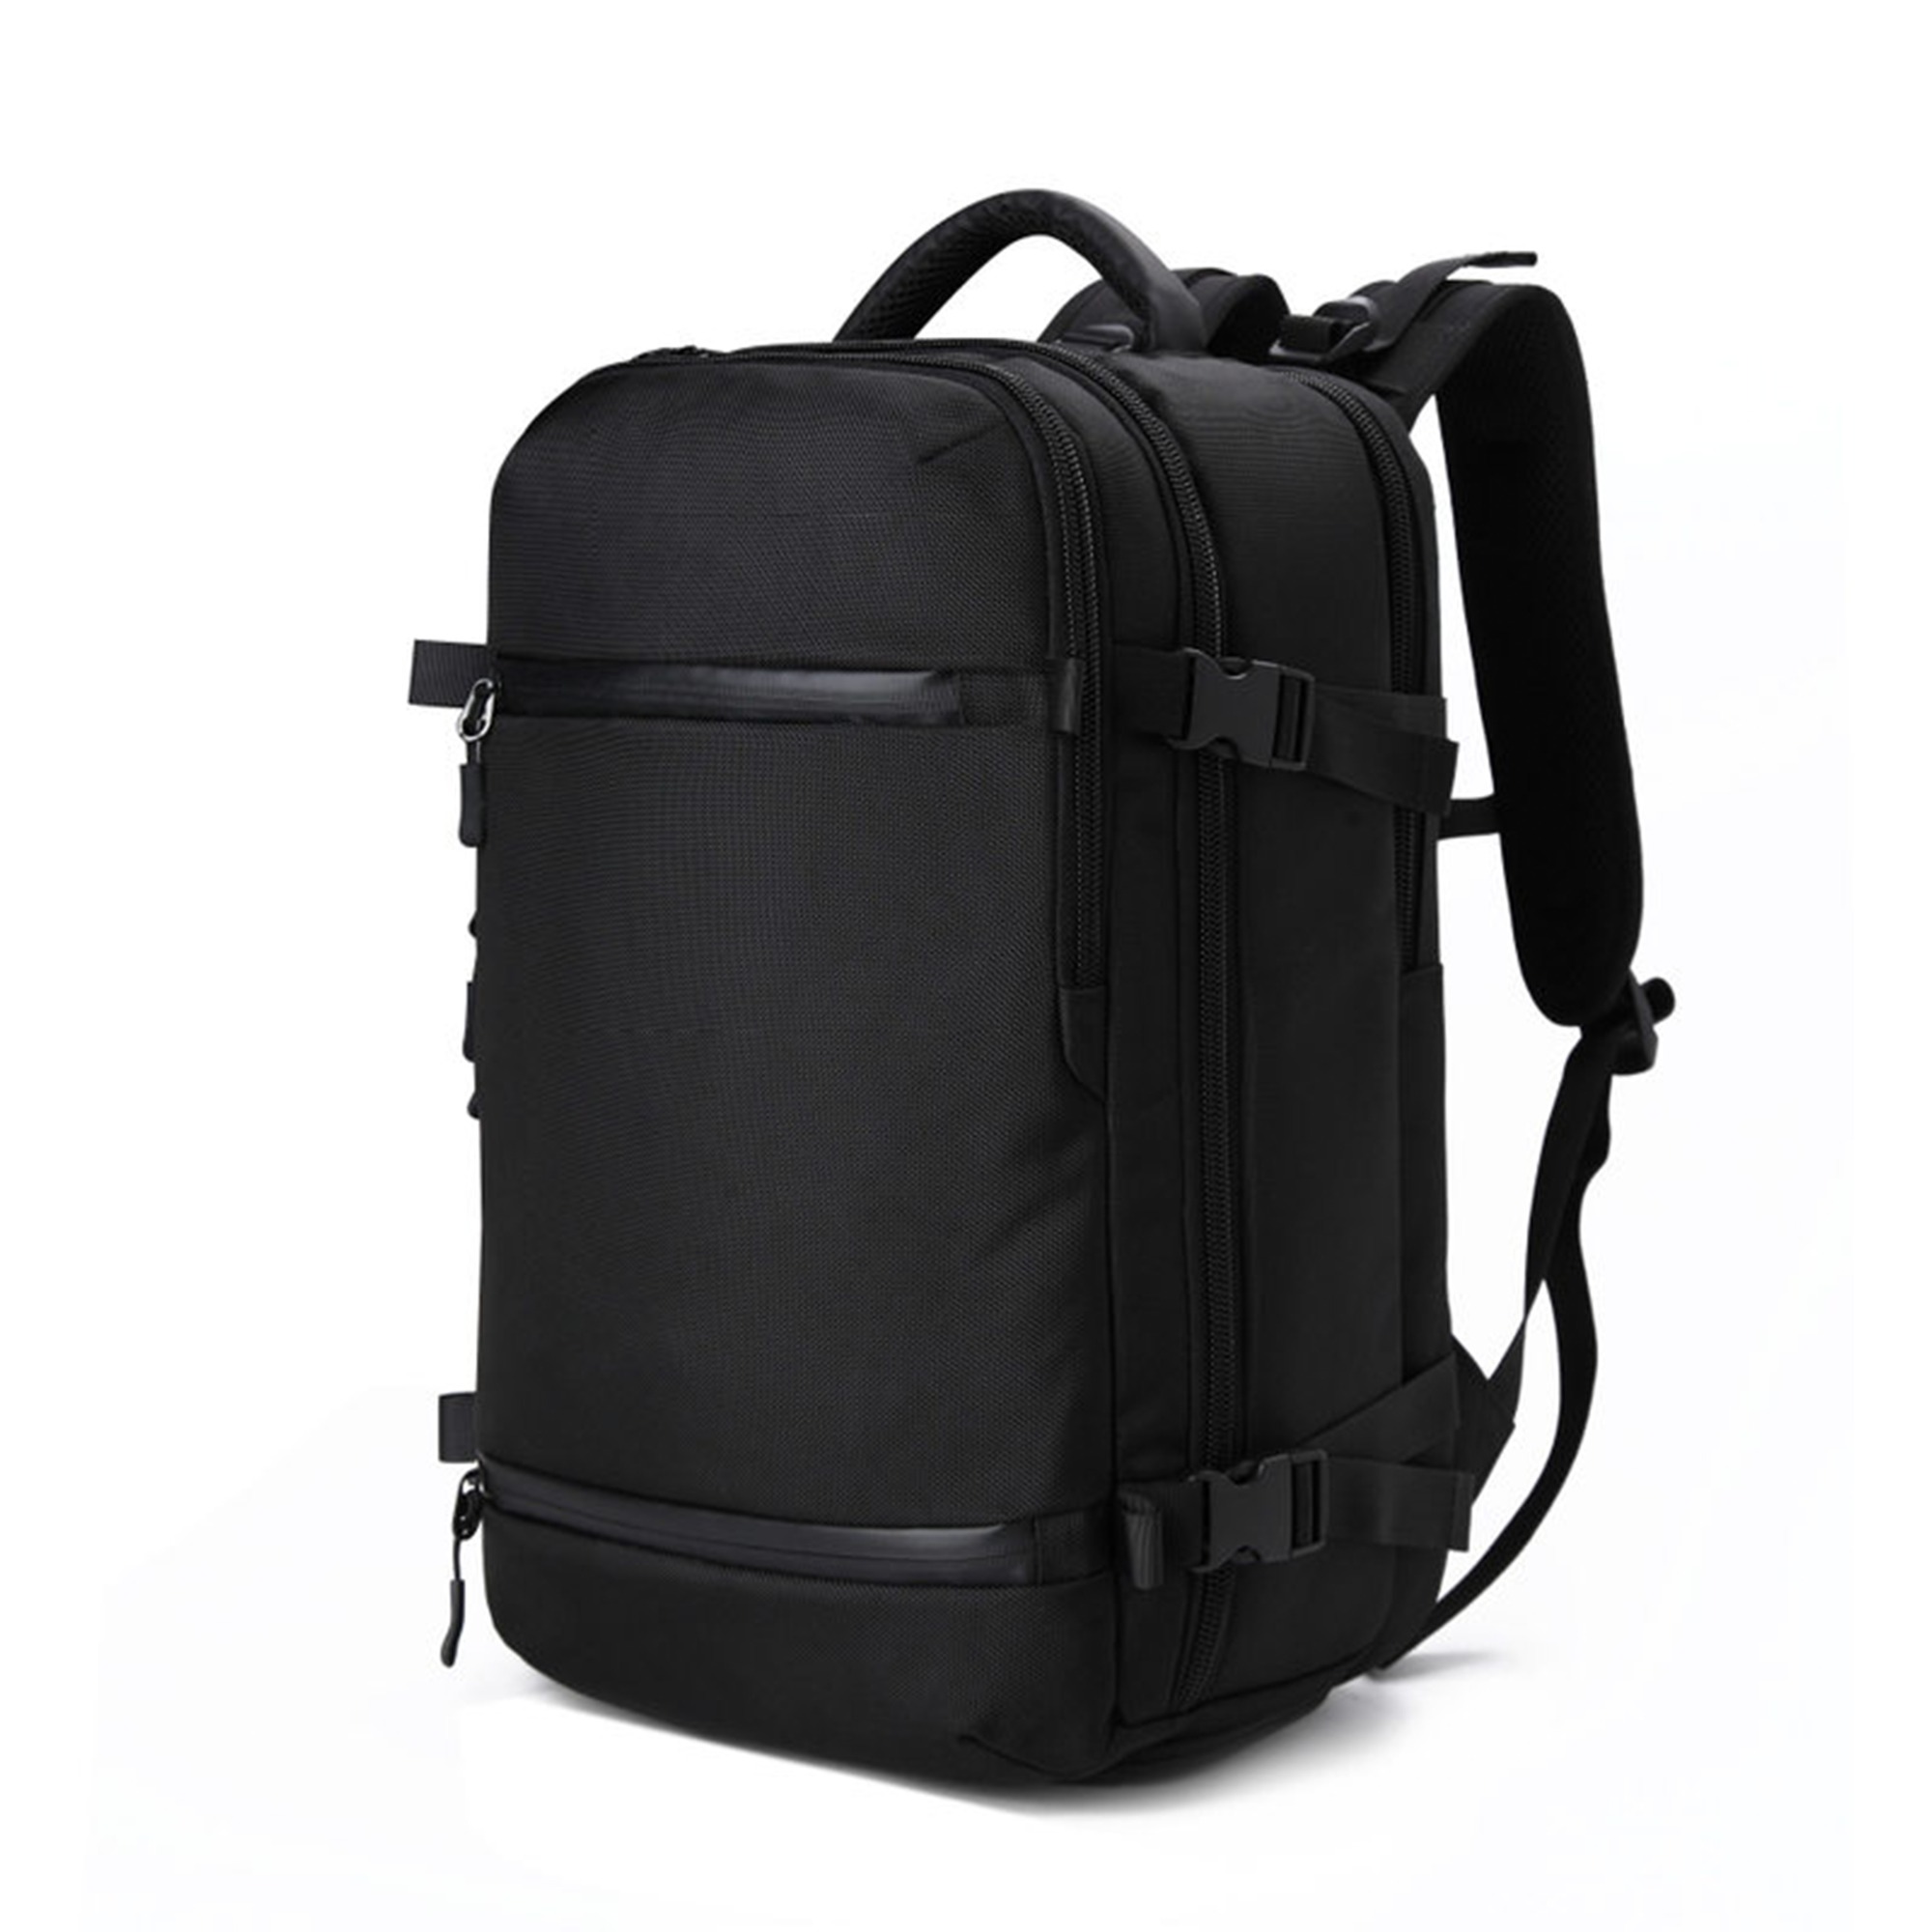 Scalable computer laptop backpack